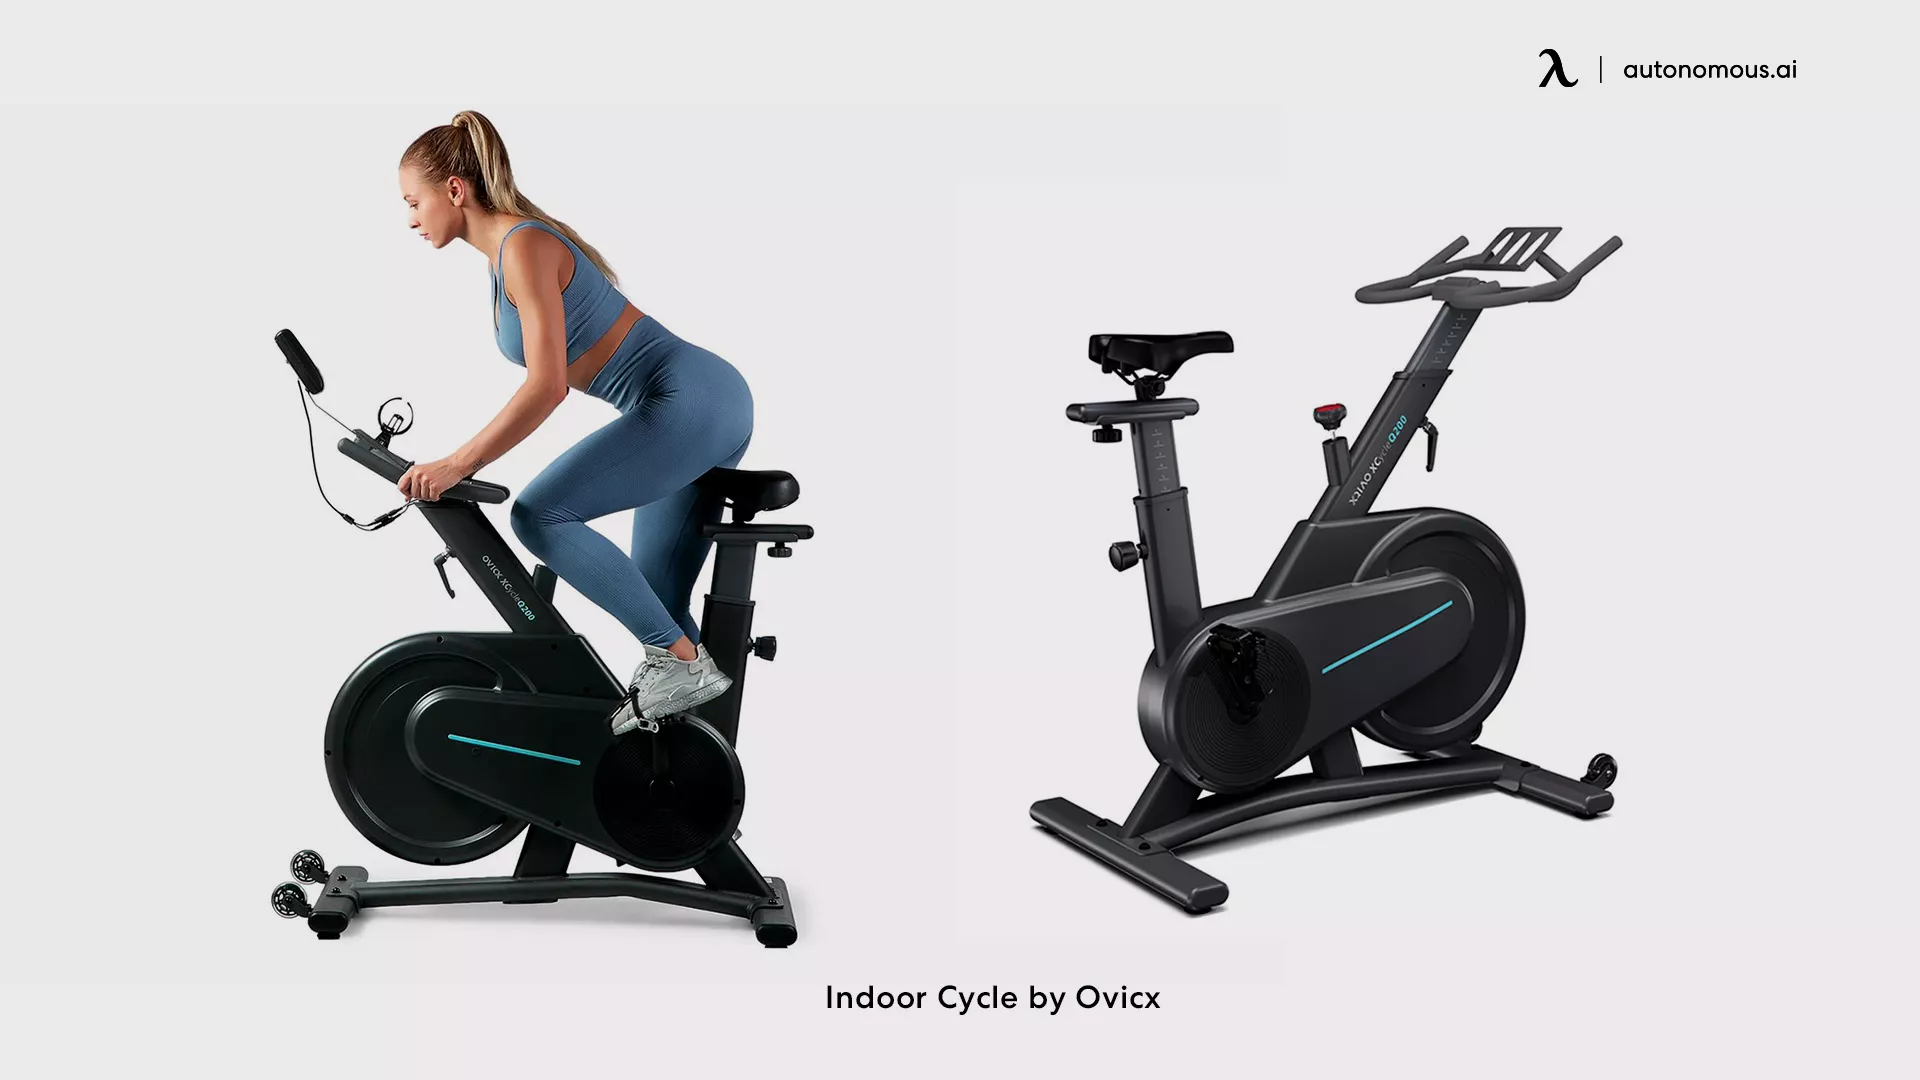 Top 5 Benefits of Getting an Indoor Cycling Desk